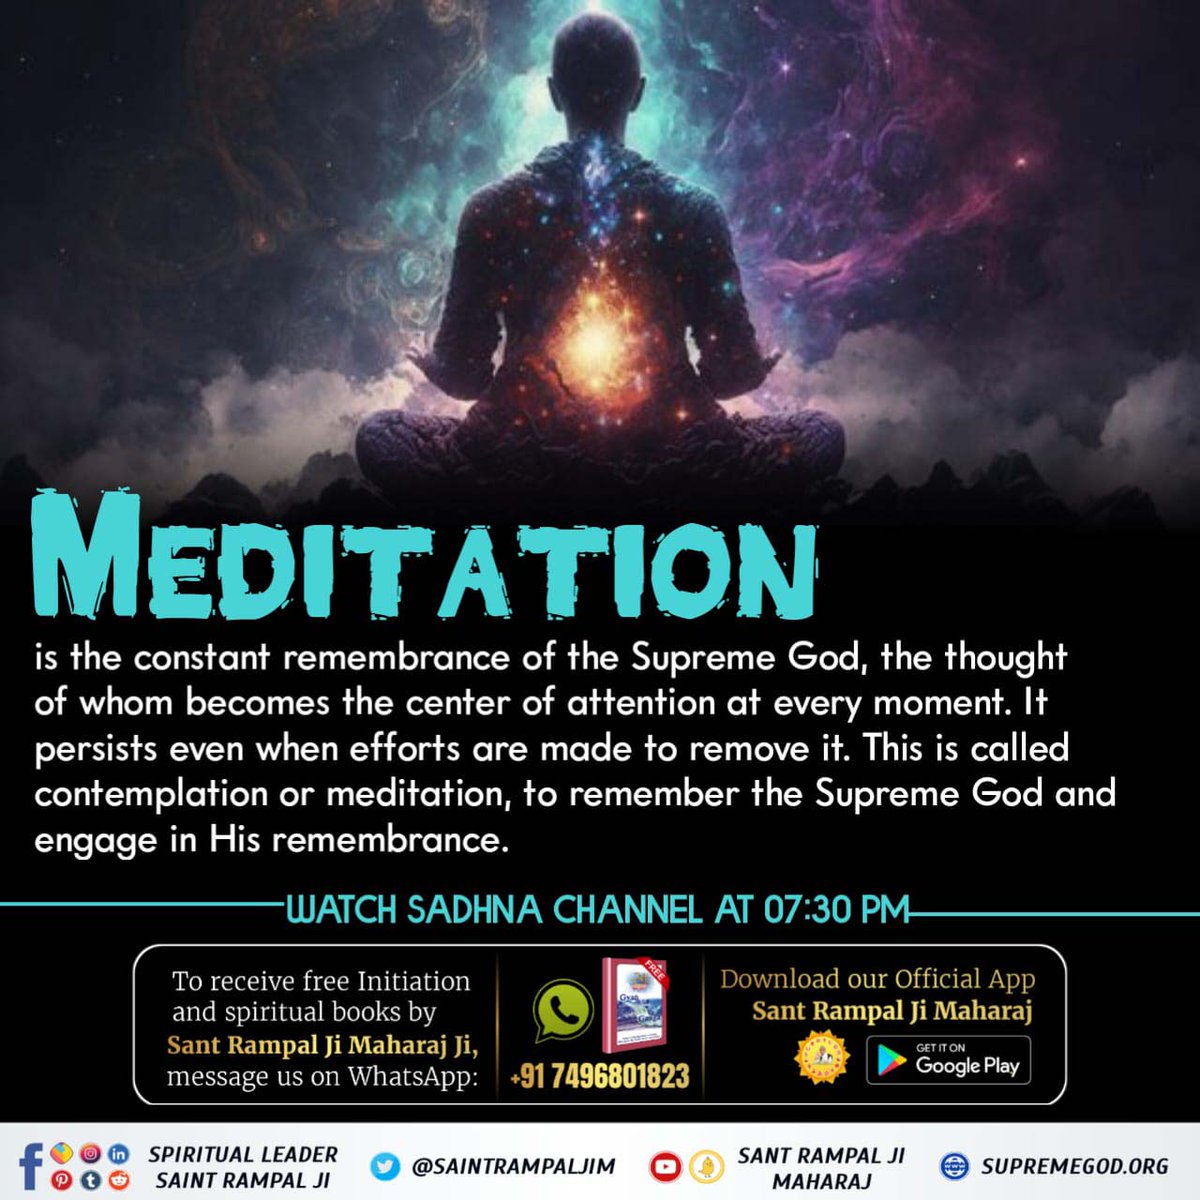 #What_Is_Meditation ? Meditation is the constant remembrance of the Supreme God, the thoughtof whom becomes the center of attention at every moment. Itpersists even when efforts are made to remove it. This is called meditation, to remember the Supreme God. Sant Rampal Ji Maharaj